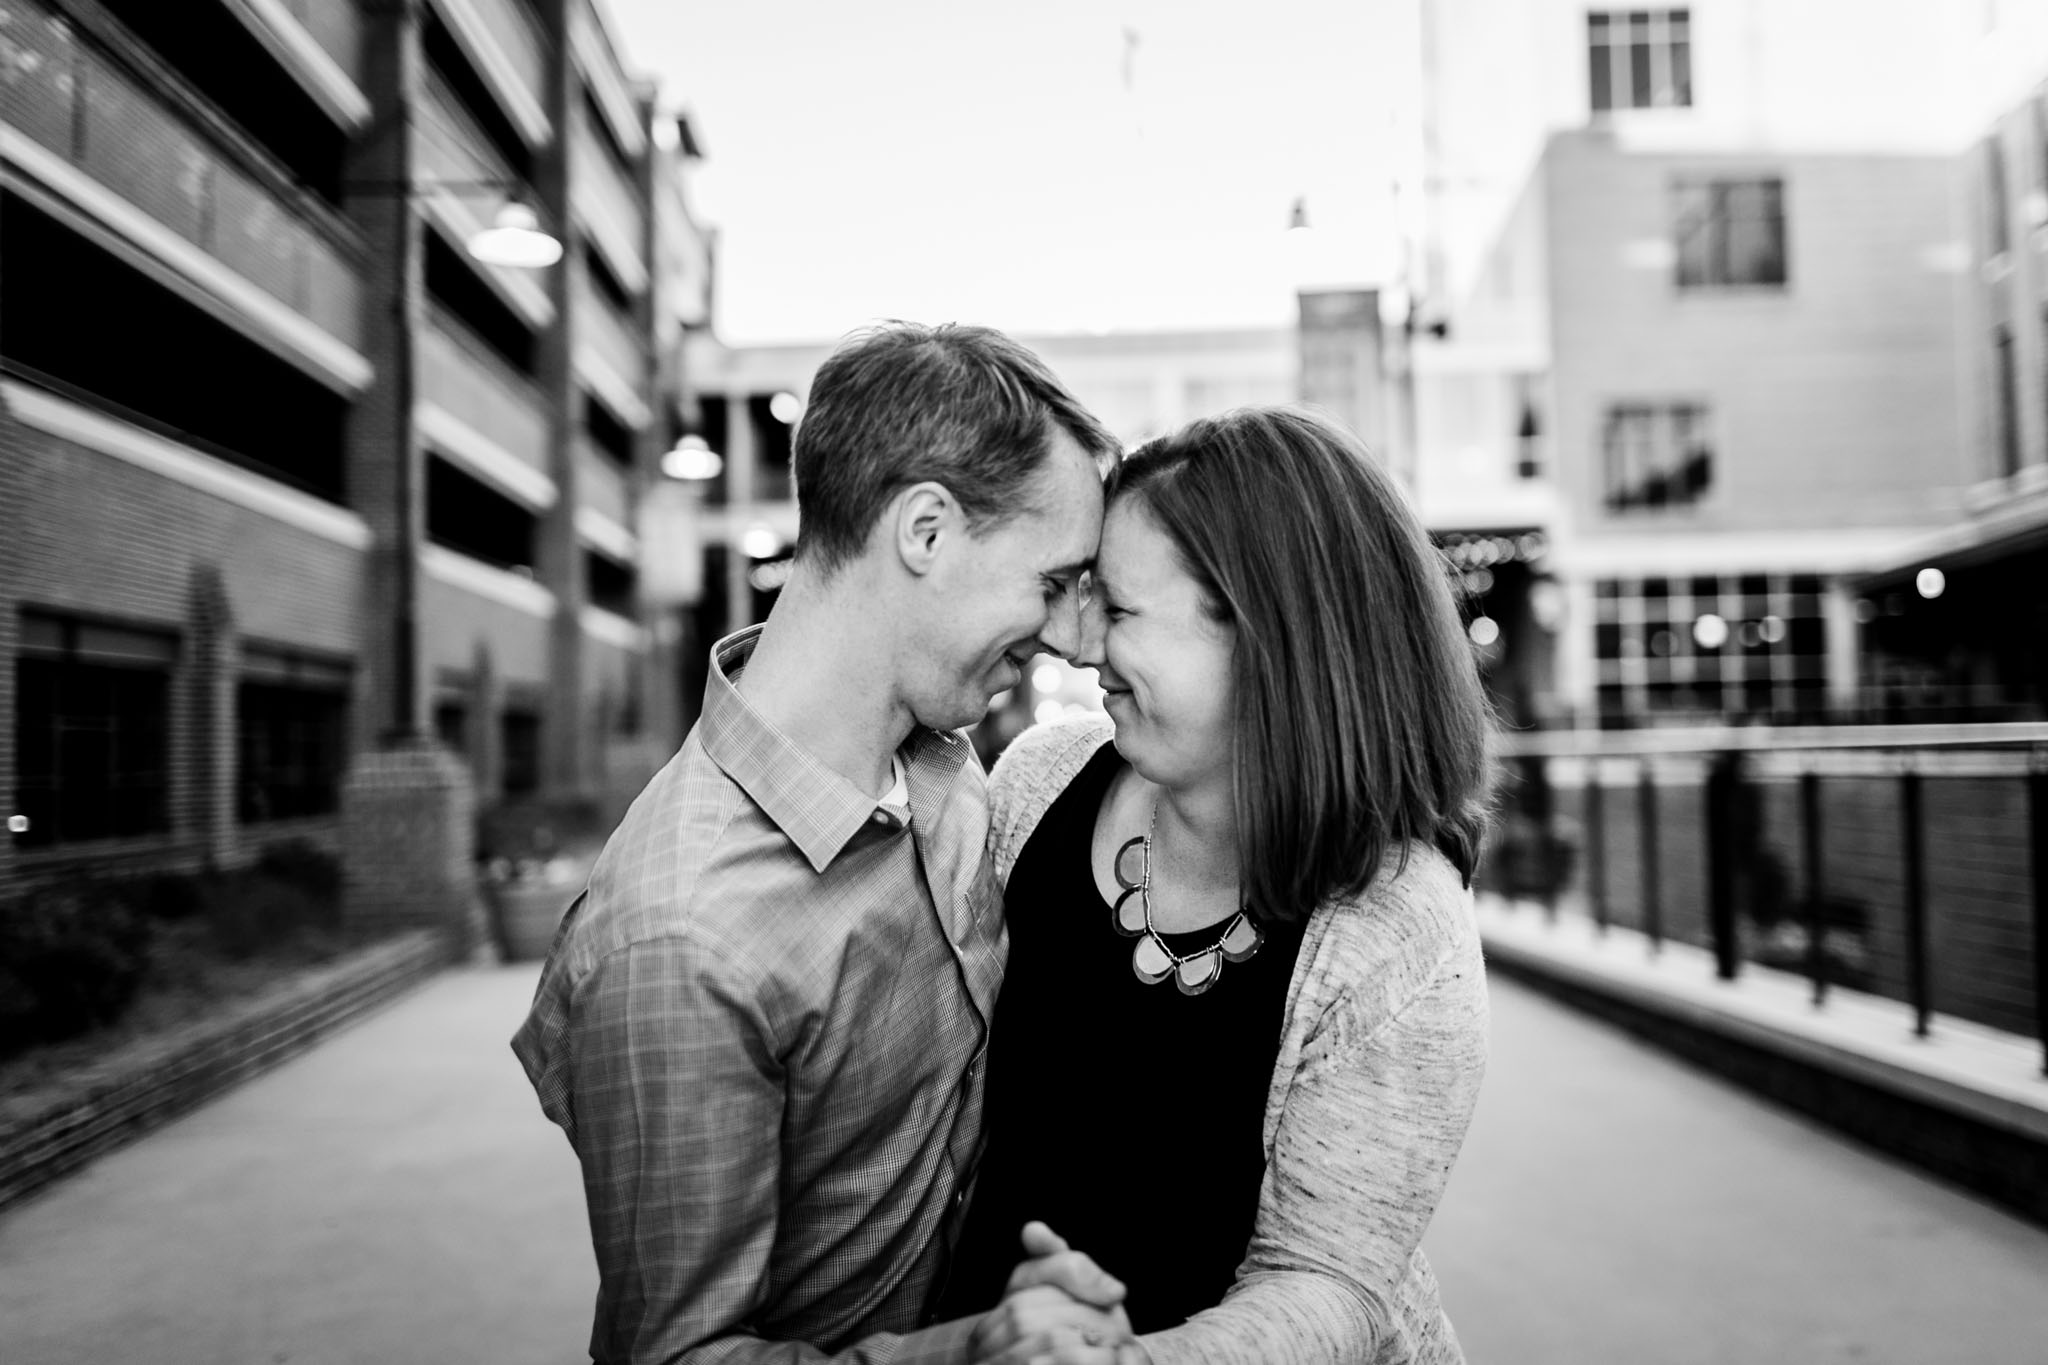 Durham Photographer | Couple dancing together at American Tobacco Campus | By G. Lin Photography